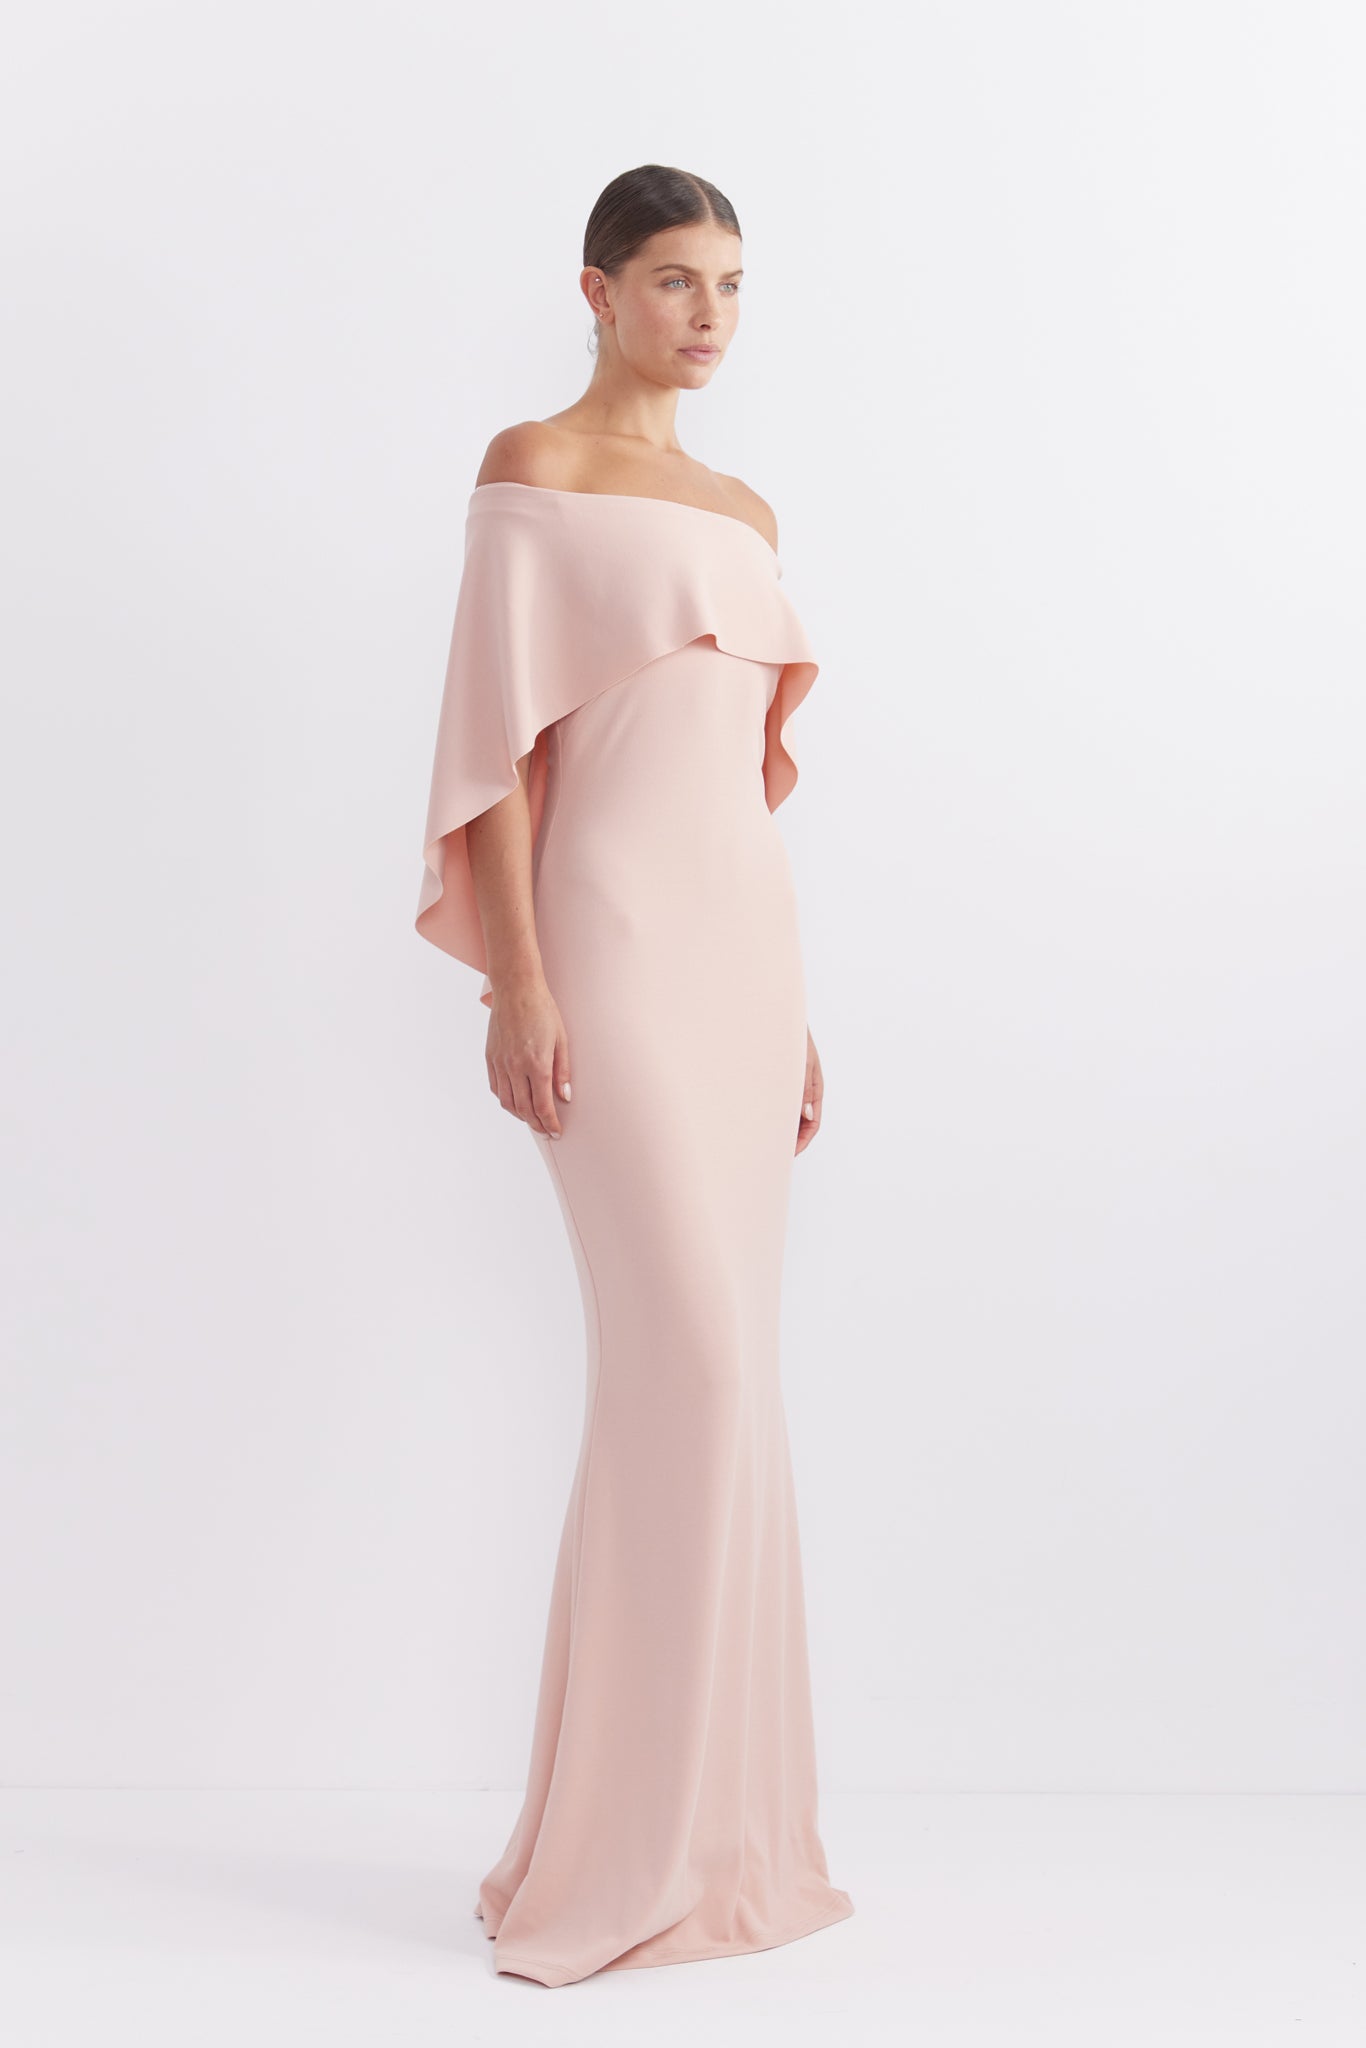 Composure Gown - TAKE 40% OFF DISCOUNT APPLIED AT CHECKOUT